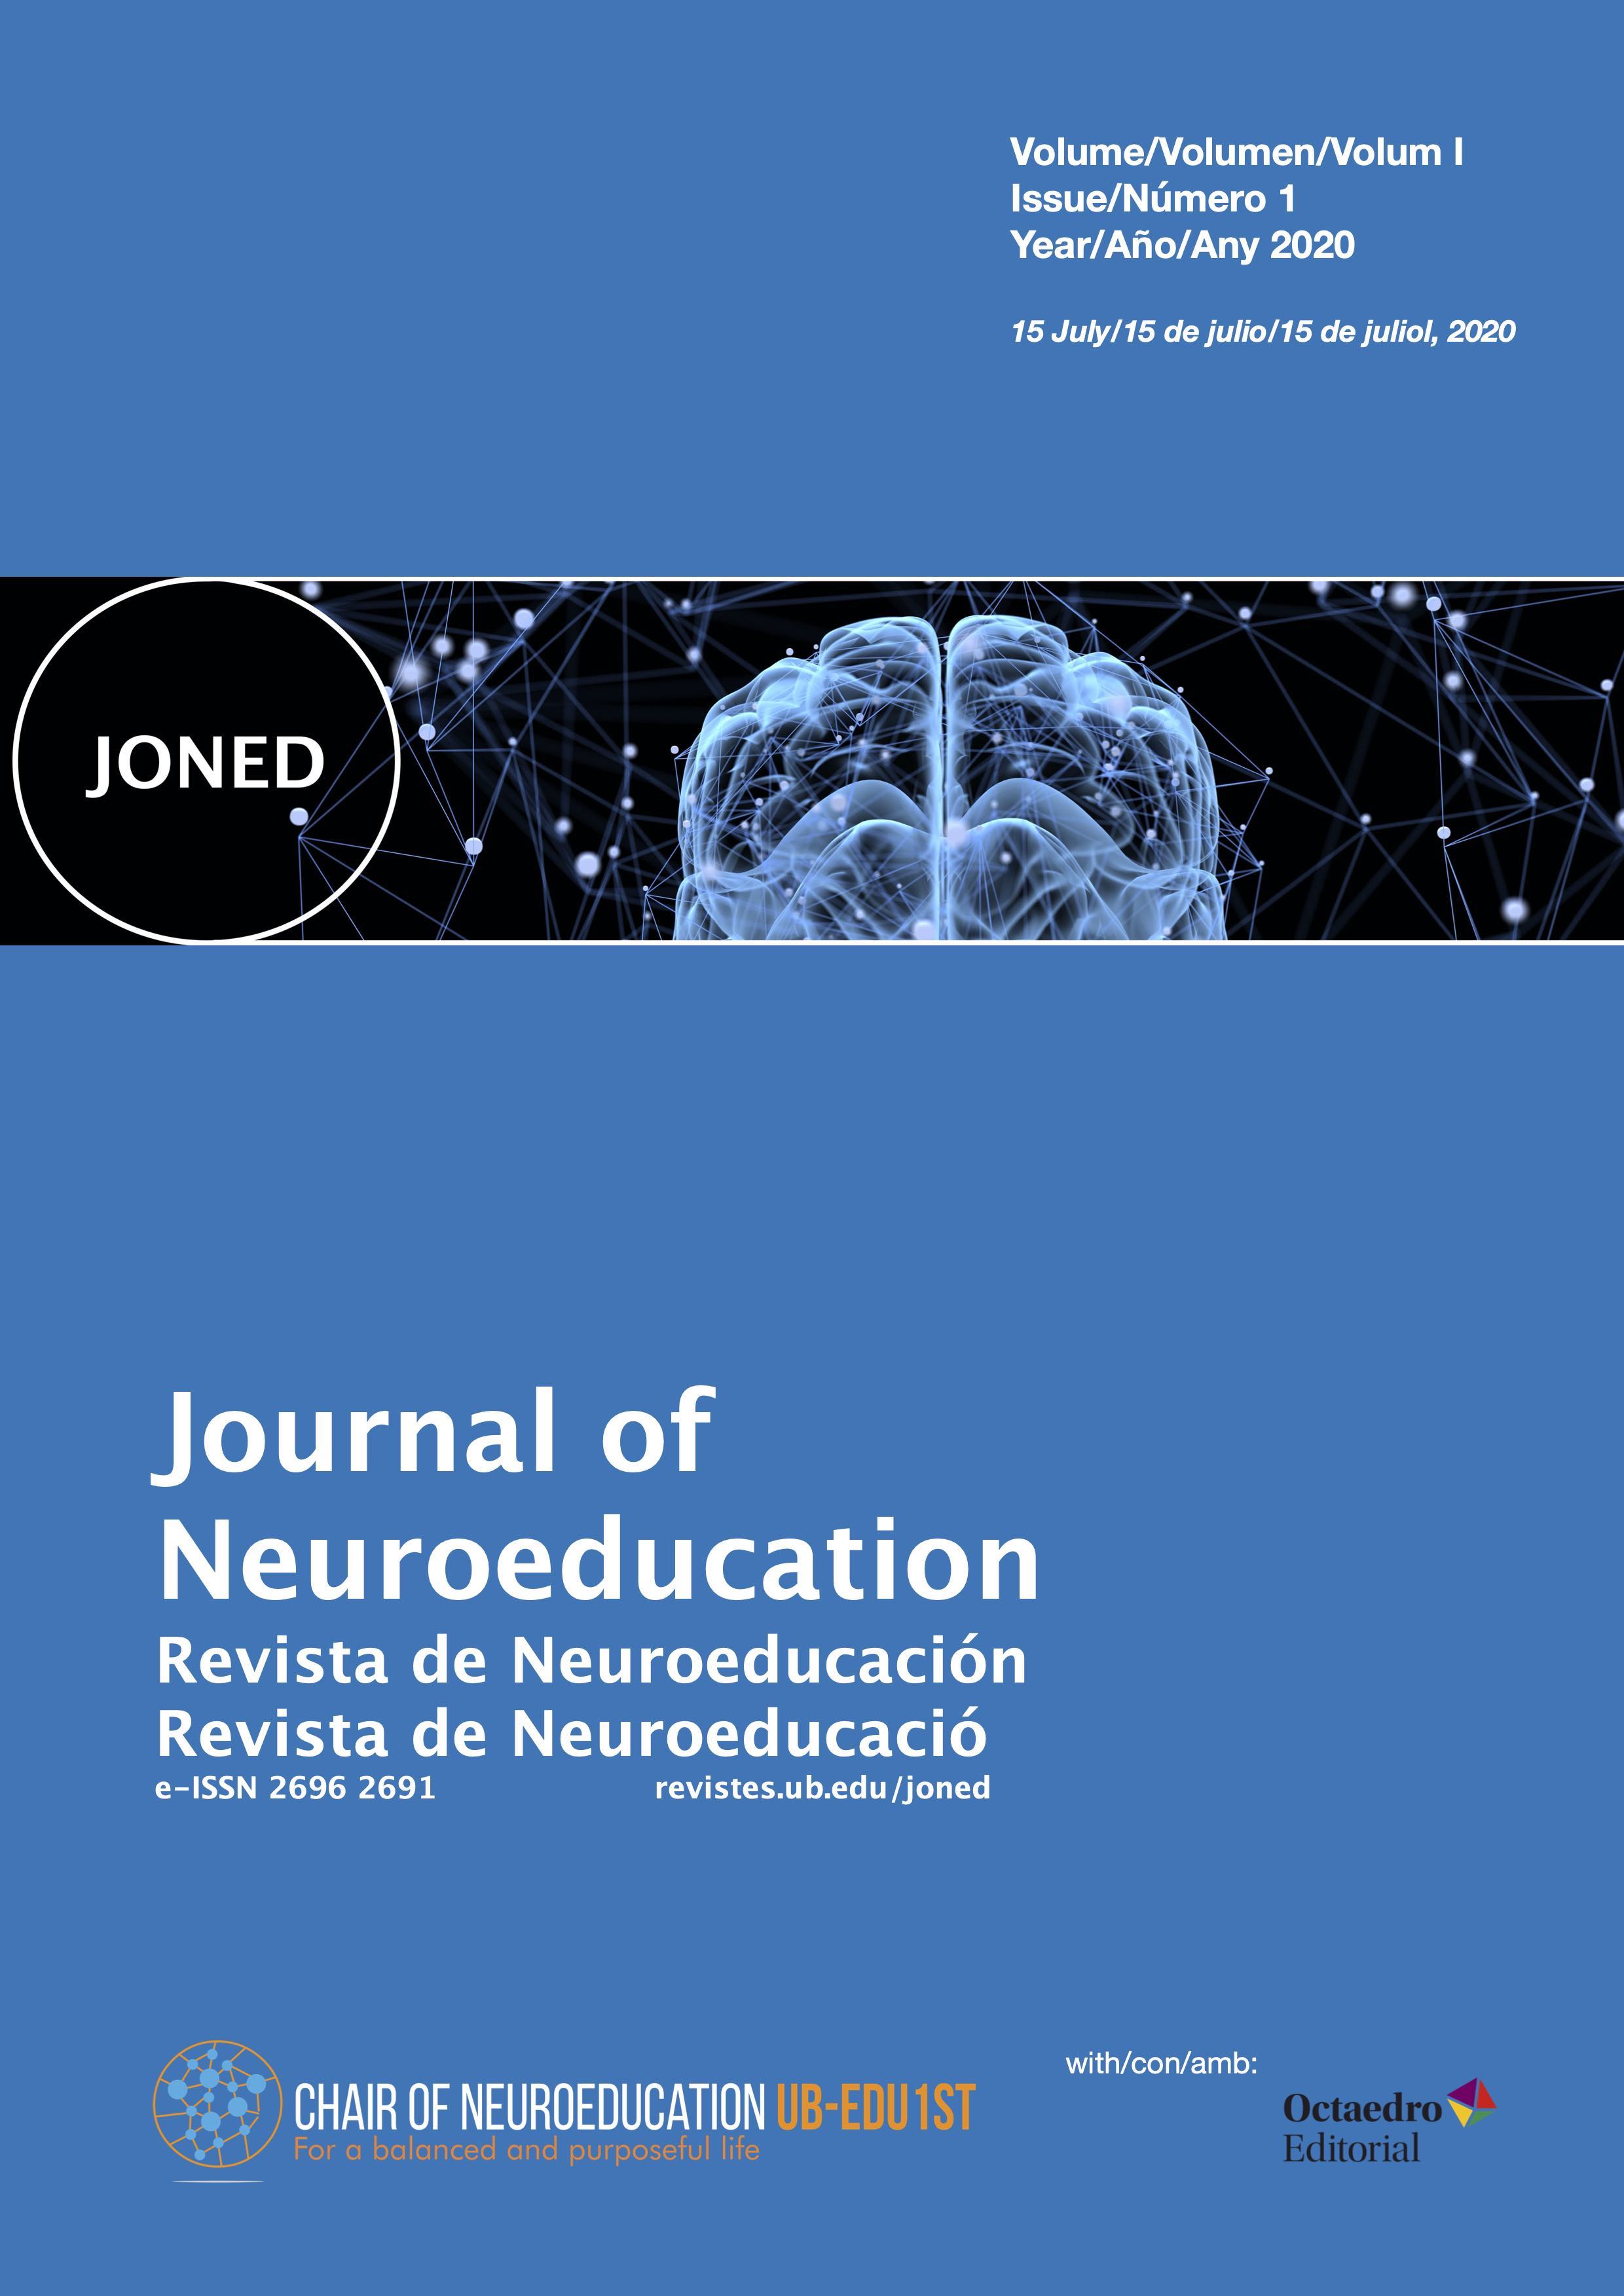 					View Vol. 1 No. 1 (2020): Journal of Neuroeducation - Volume I, Issue 1, July 2020
				